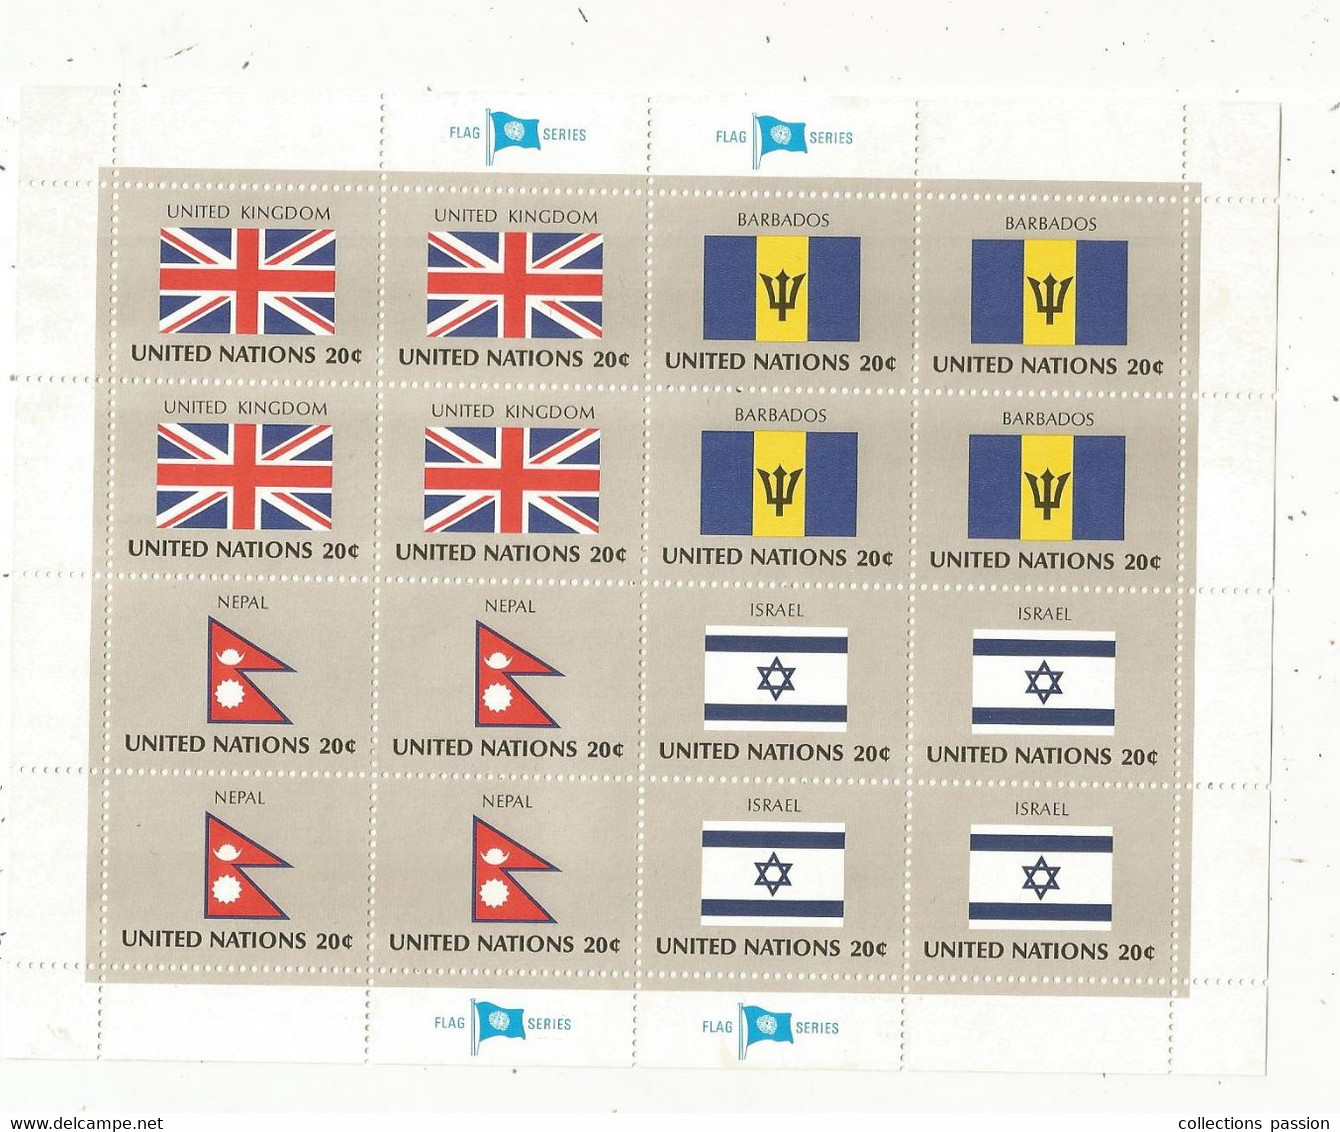 Timbre Neuf,UNITED NATIONS, Flag Series, United Kingdom, Barbados, Nepal, Israel, BLOC DE 16 TIMBRES , Frais Fr 1.75 E - Collections, Lots & Séries